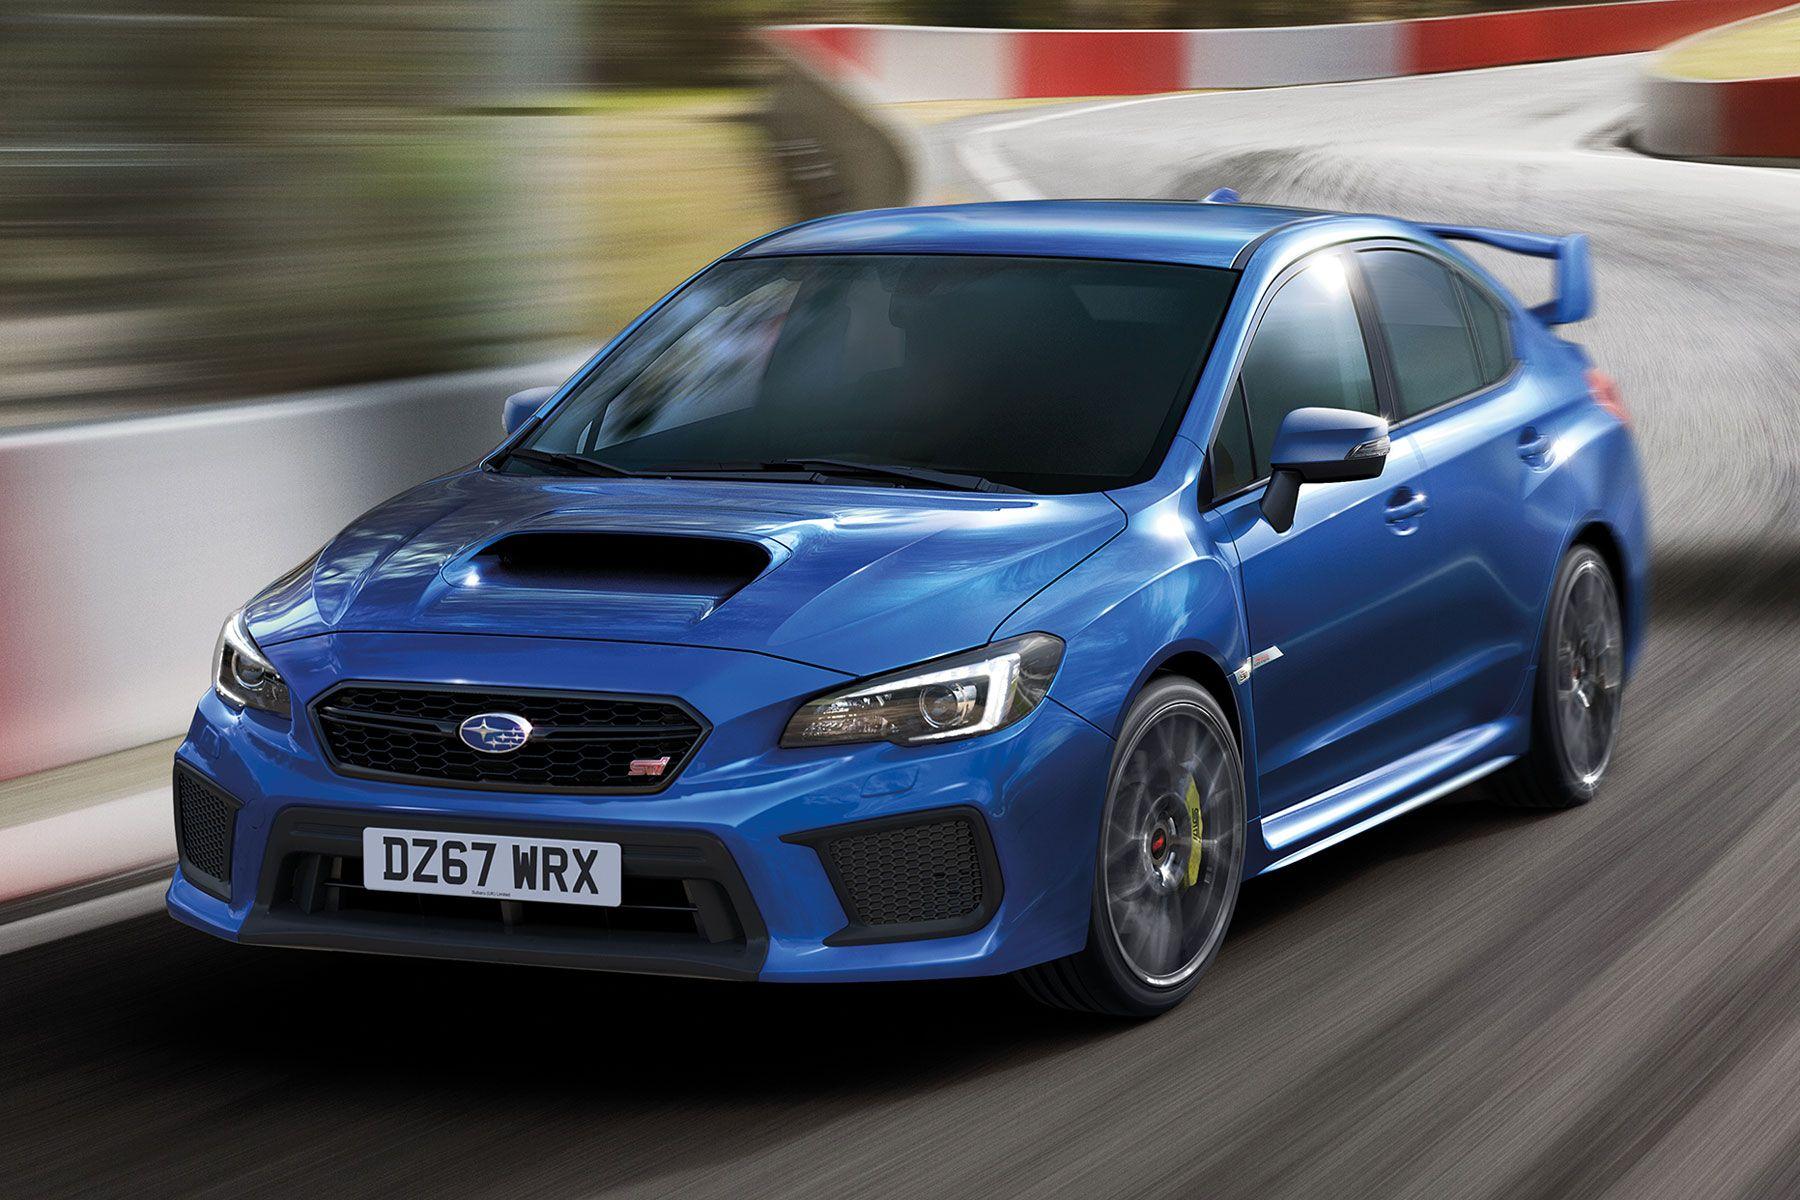 New Subaru WRX Logo - This is your last chance to buy a new Subaru WRX STi in the UK